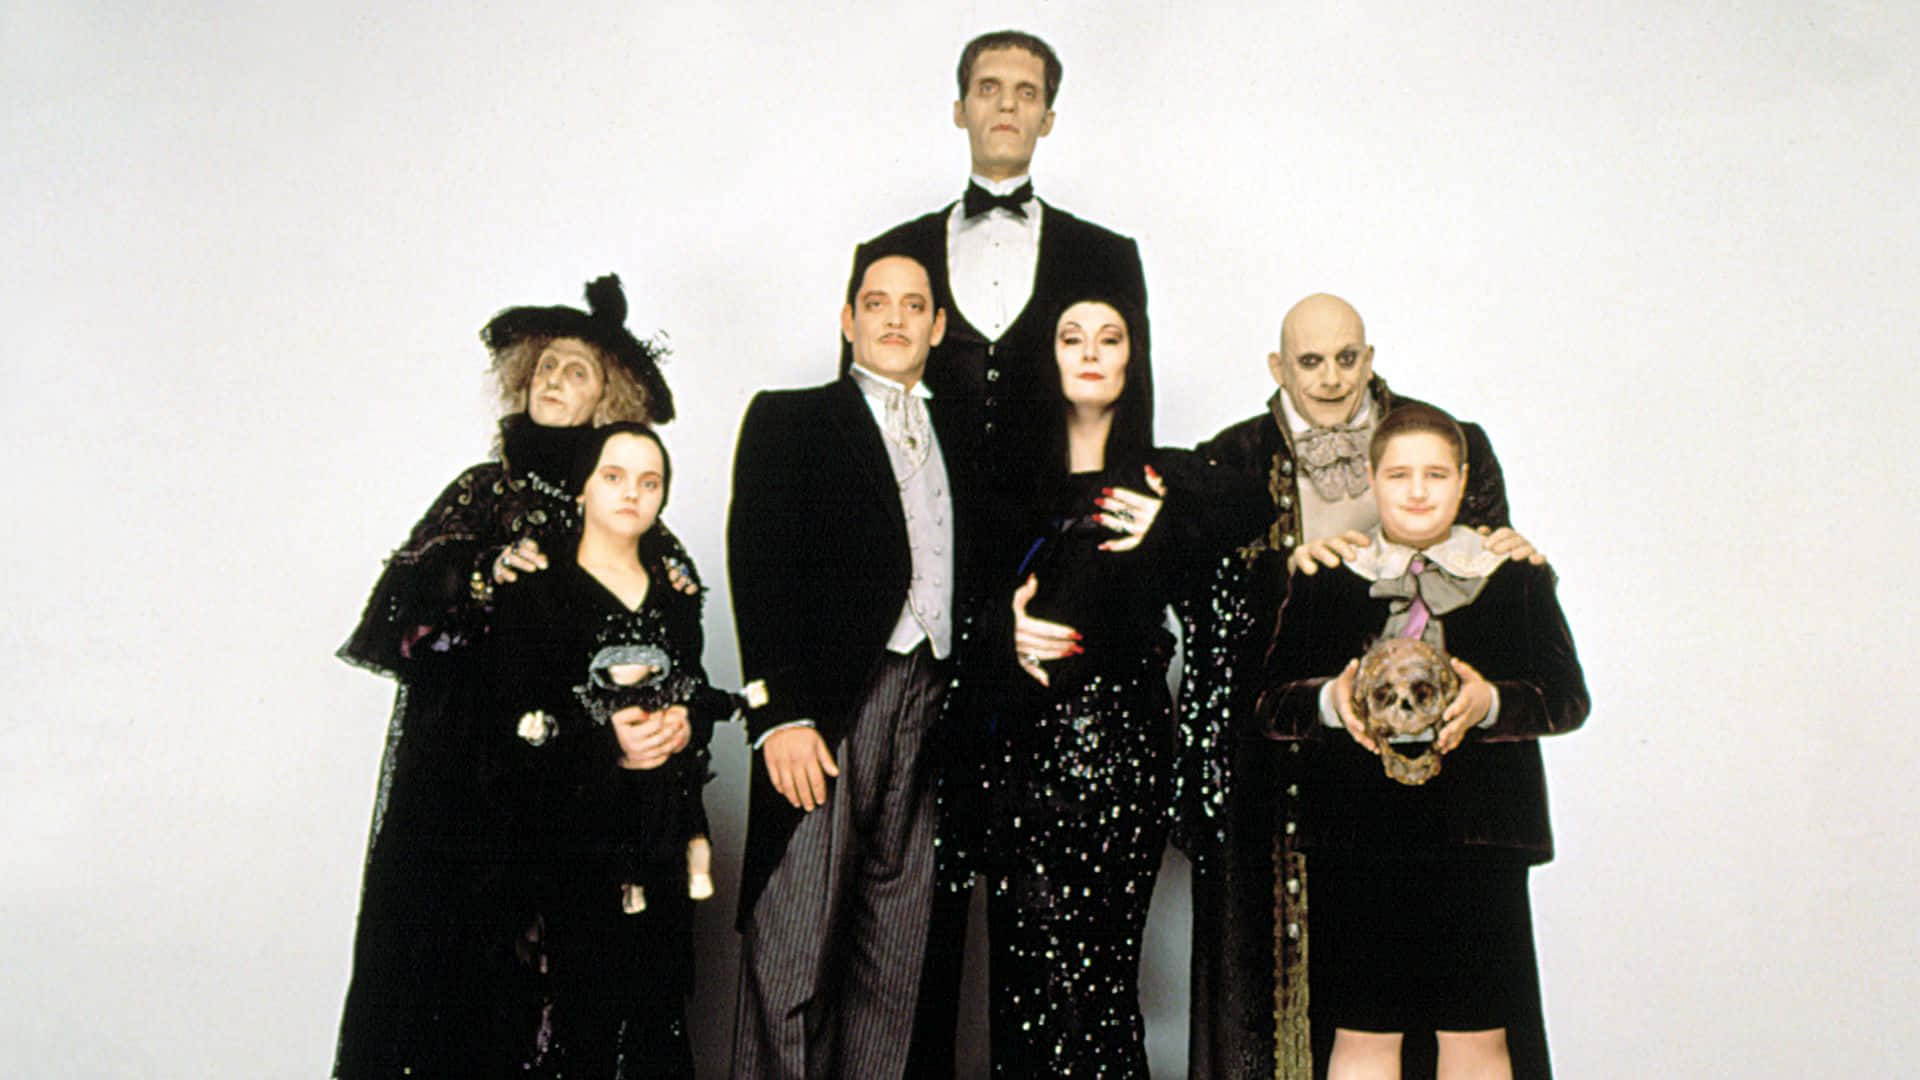 The iconic Addams Family